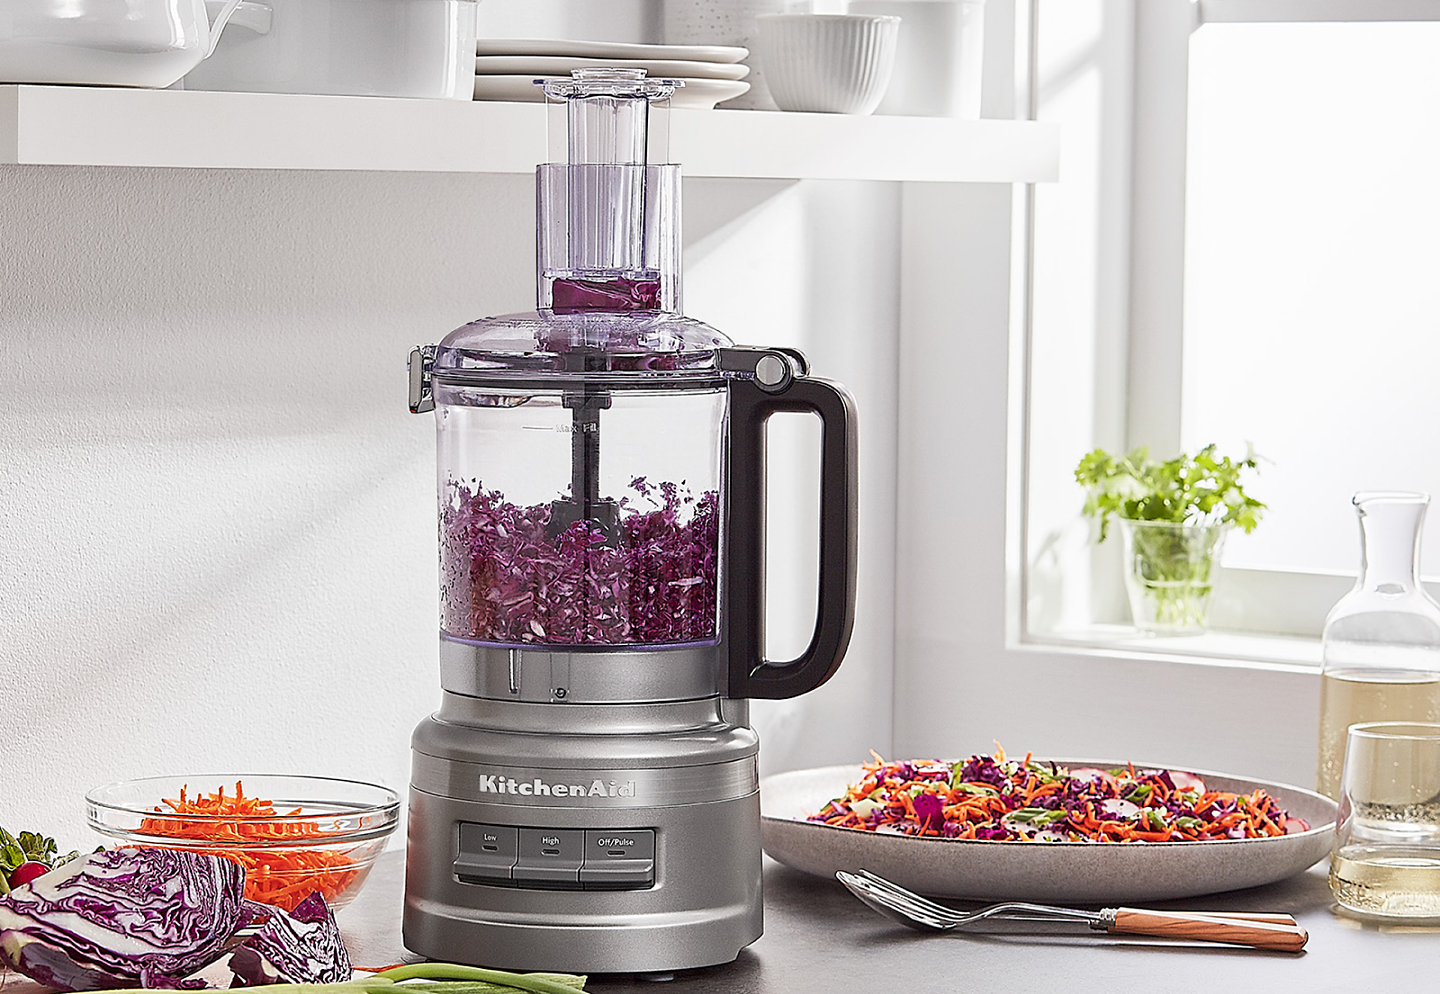 https://kitchenaid-h.assetsadobe.com/is/image/content/dam/business-unit/kitchenaid/en-us/marketing-content/site-assets/page-content/blog/how-to-shred-cabbage-in-a-food-processor/How-to-Shred-Cabbage-in-a-Food-Processor-H2-1-2.jpg?fmt=png-alpha&qlt=85,0&resMode=sharp2&op_usm=1.75,0.3,2,0&scl=1&constrain=fit,1